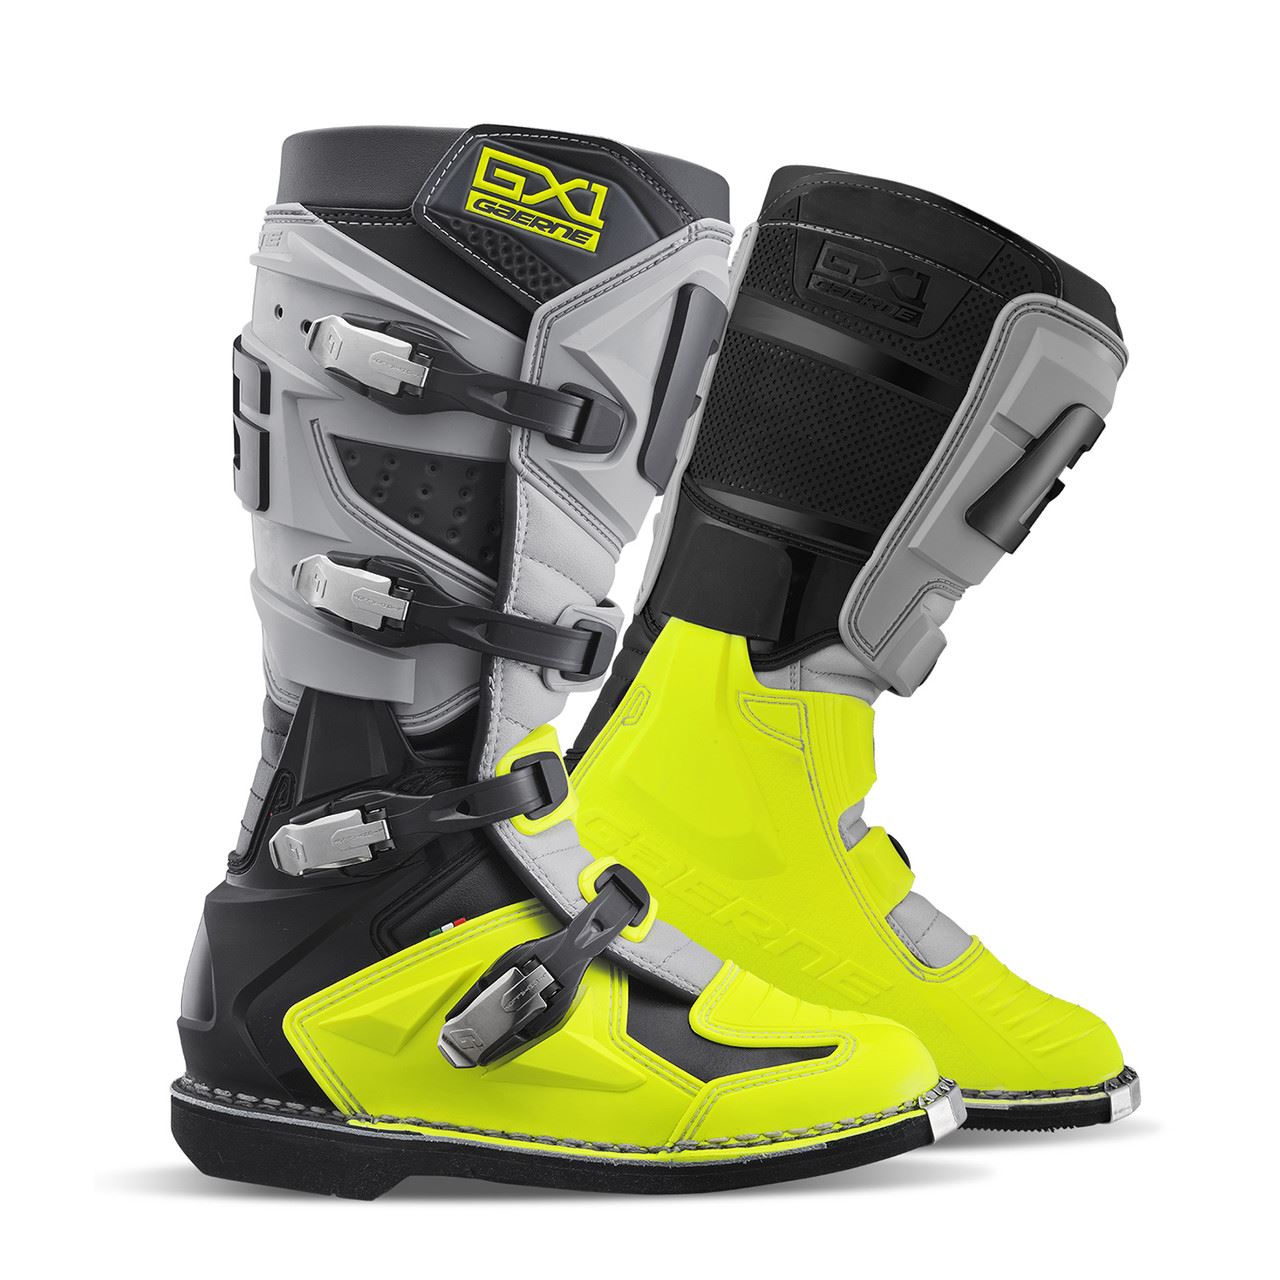 Gaerne Youth GX1 Motocross Boots Yellow Black